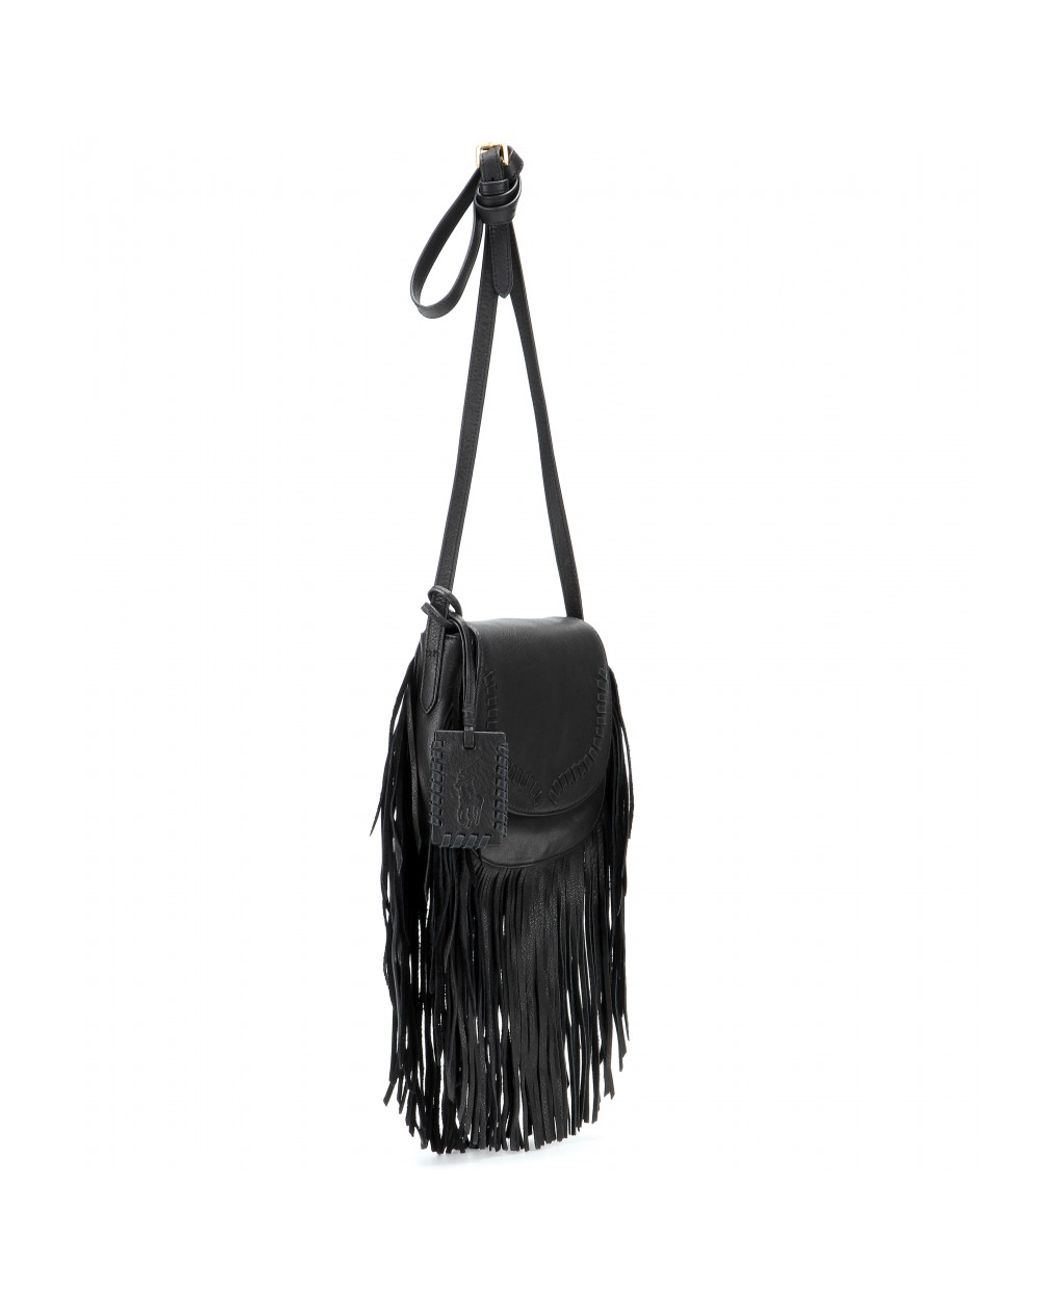 Polish Hand Crafted Leather Purse With Tassels 10.5